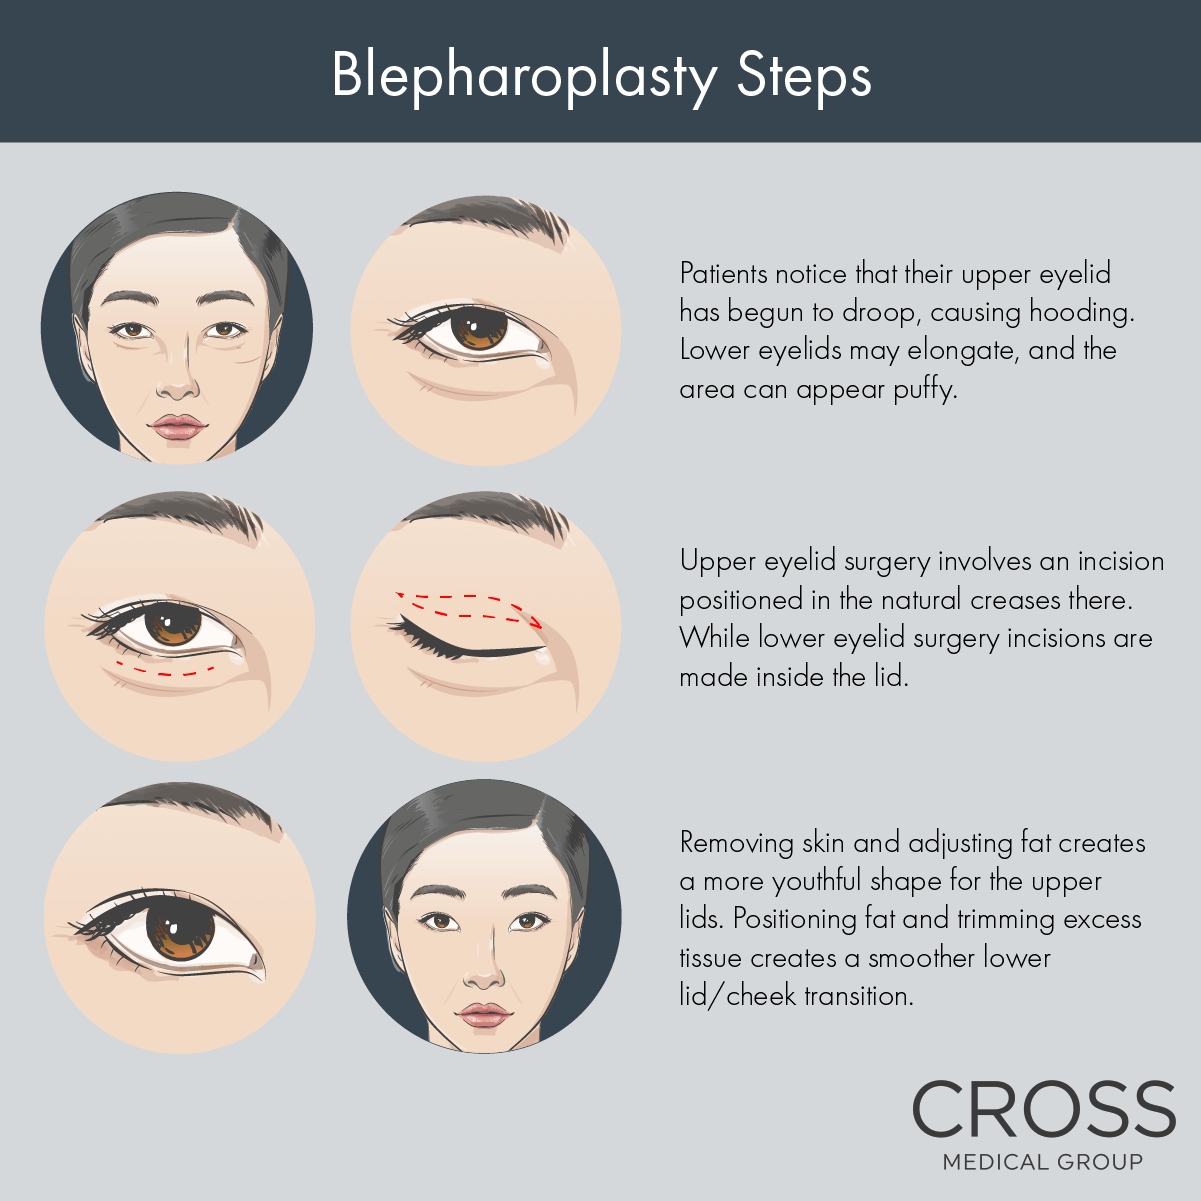 Get details about blepharoplasty at the Philadelphia area’s Cross Medical Group.